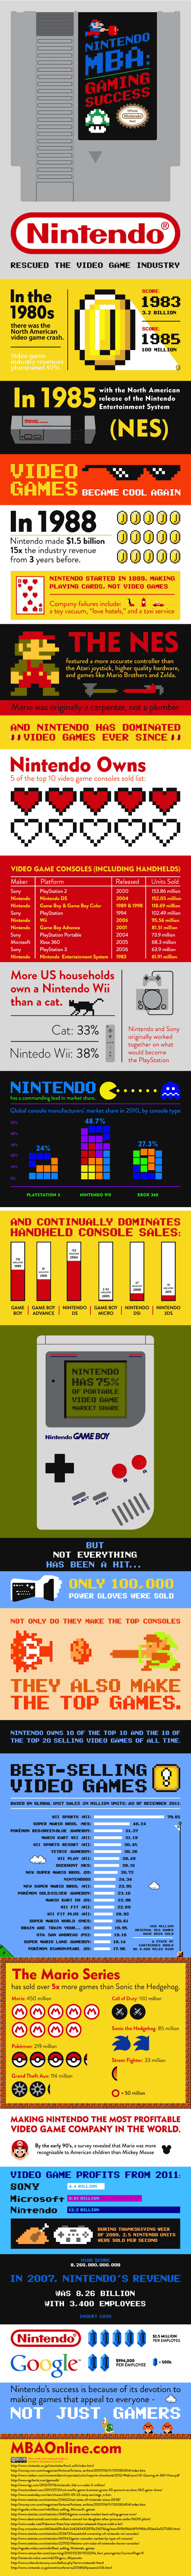 Everything You Could Every Want to Know About Nintendo’s Success